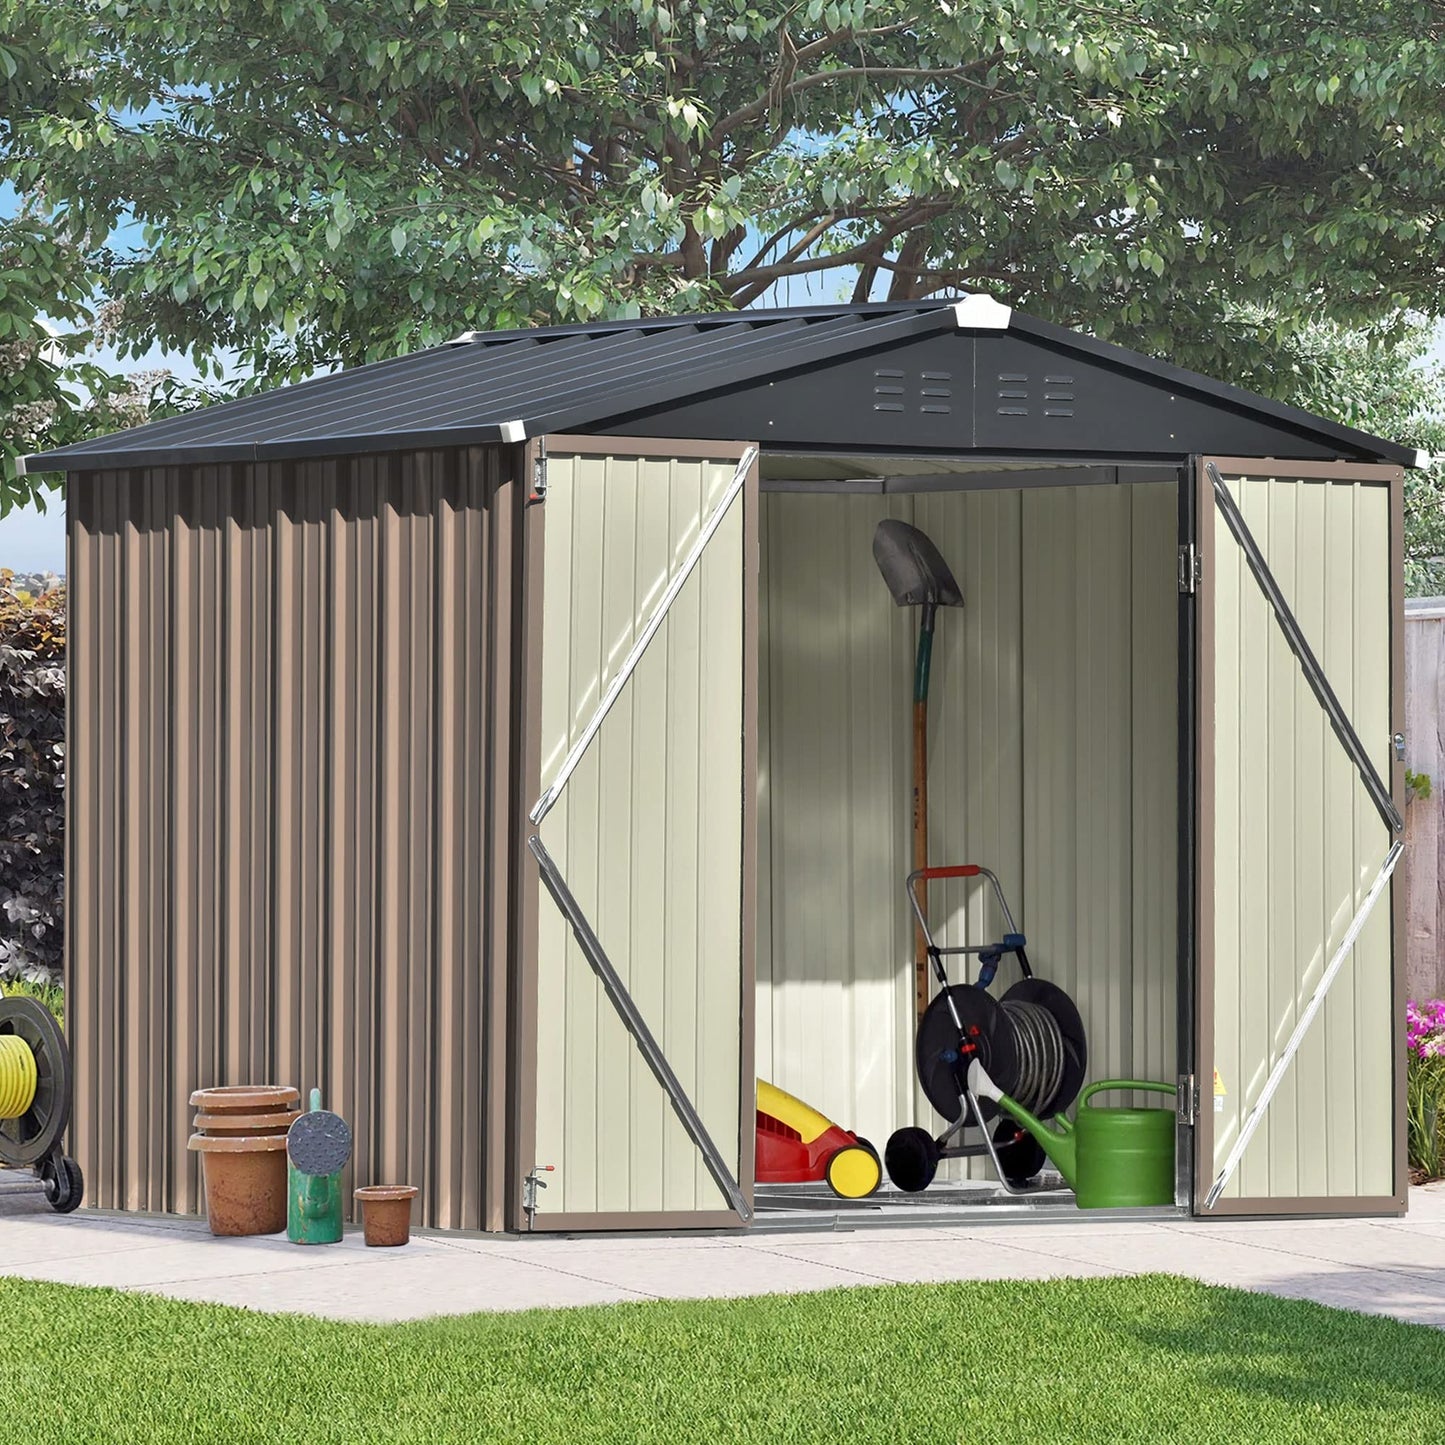 DHPM 8x6 FT Bike Shed Garden Shed, Metal Storage Shed with Lockable Door, Tool Cabinet with Vents and Foundation for Backyard, Lawn, Garden Brown